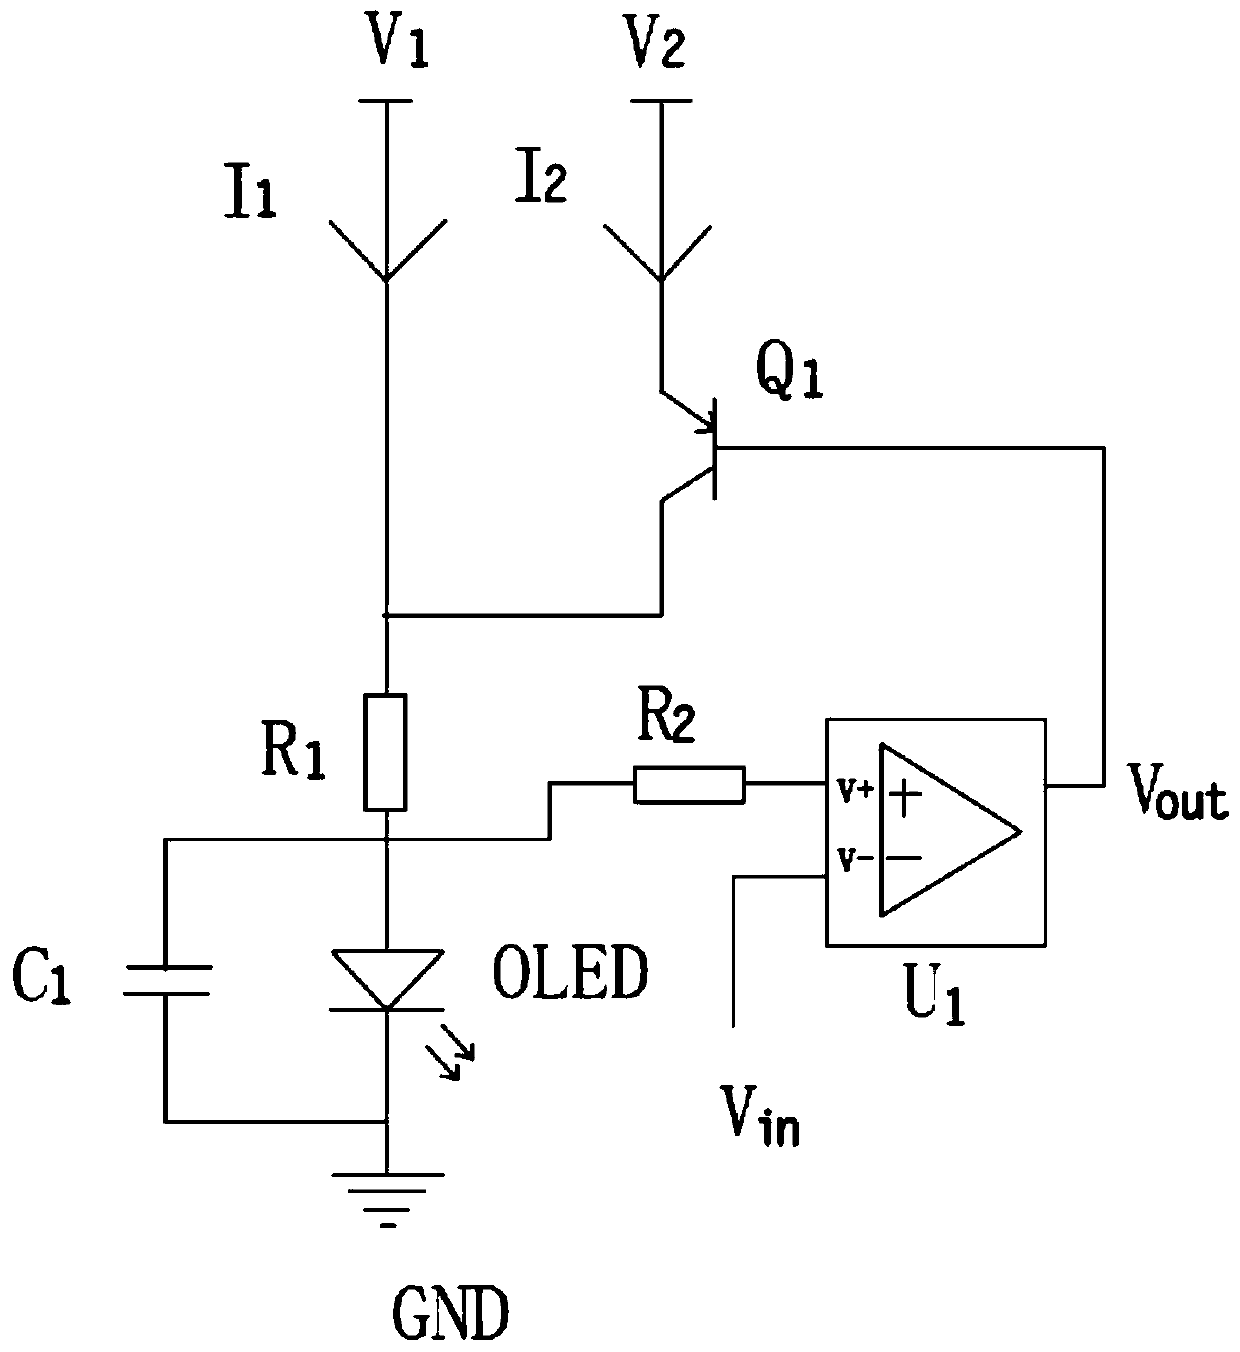 An oled screen drive circuit with a fuse type anti-short circuit structure